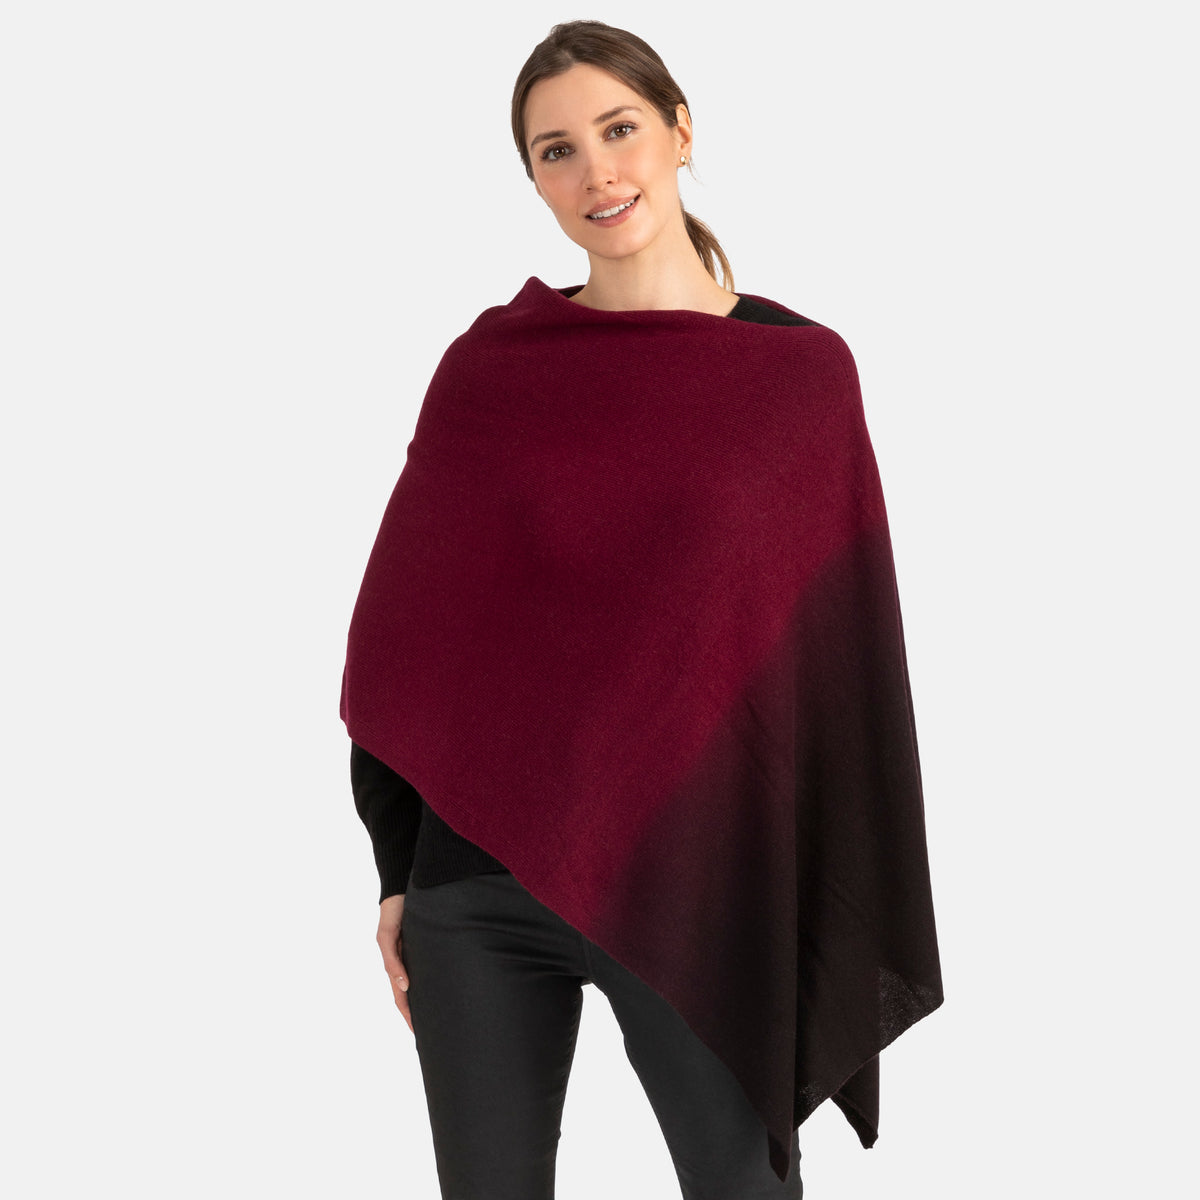 Picture of a woman wearing an assymetrical cashmere knit over the head poncho with dip dye patter in burgundy and black.